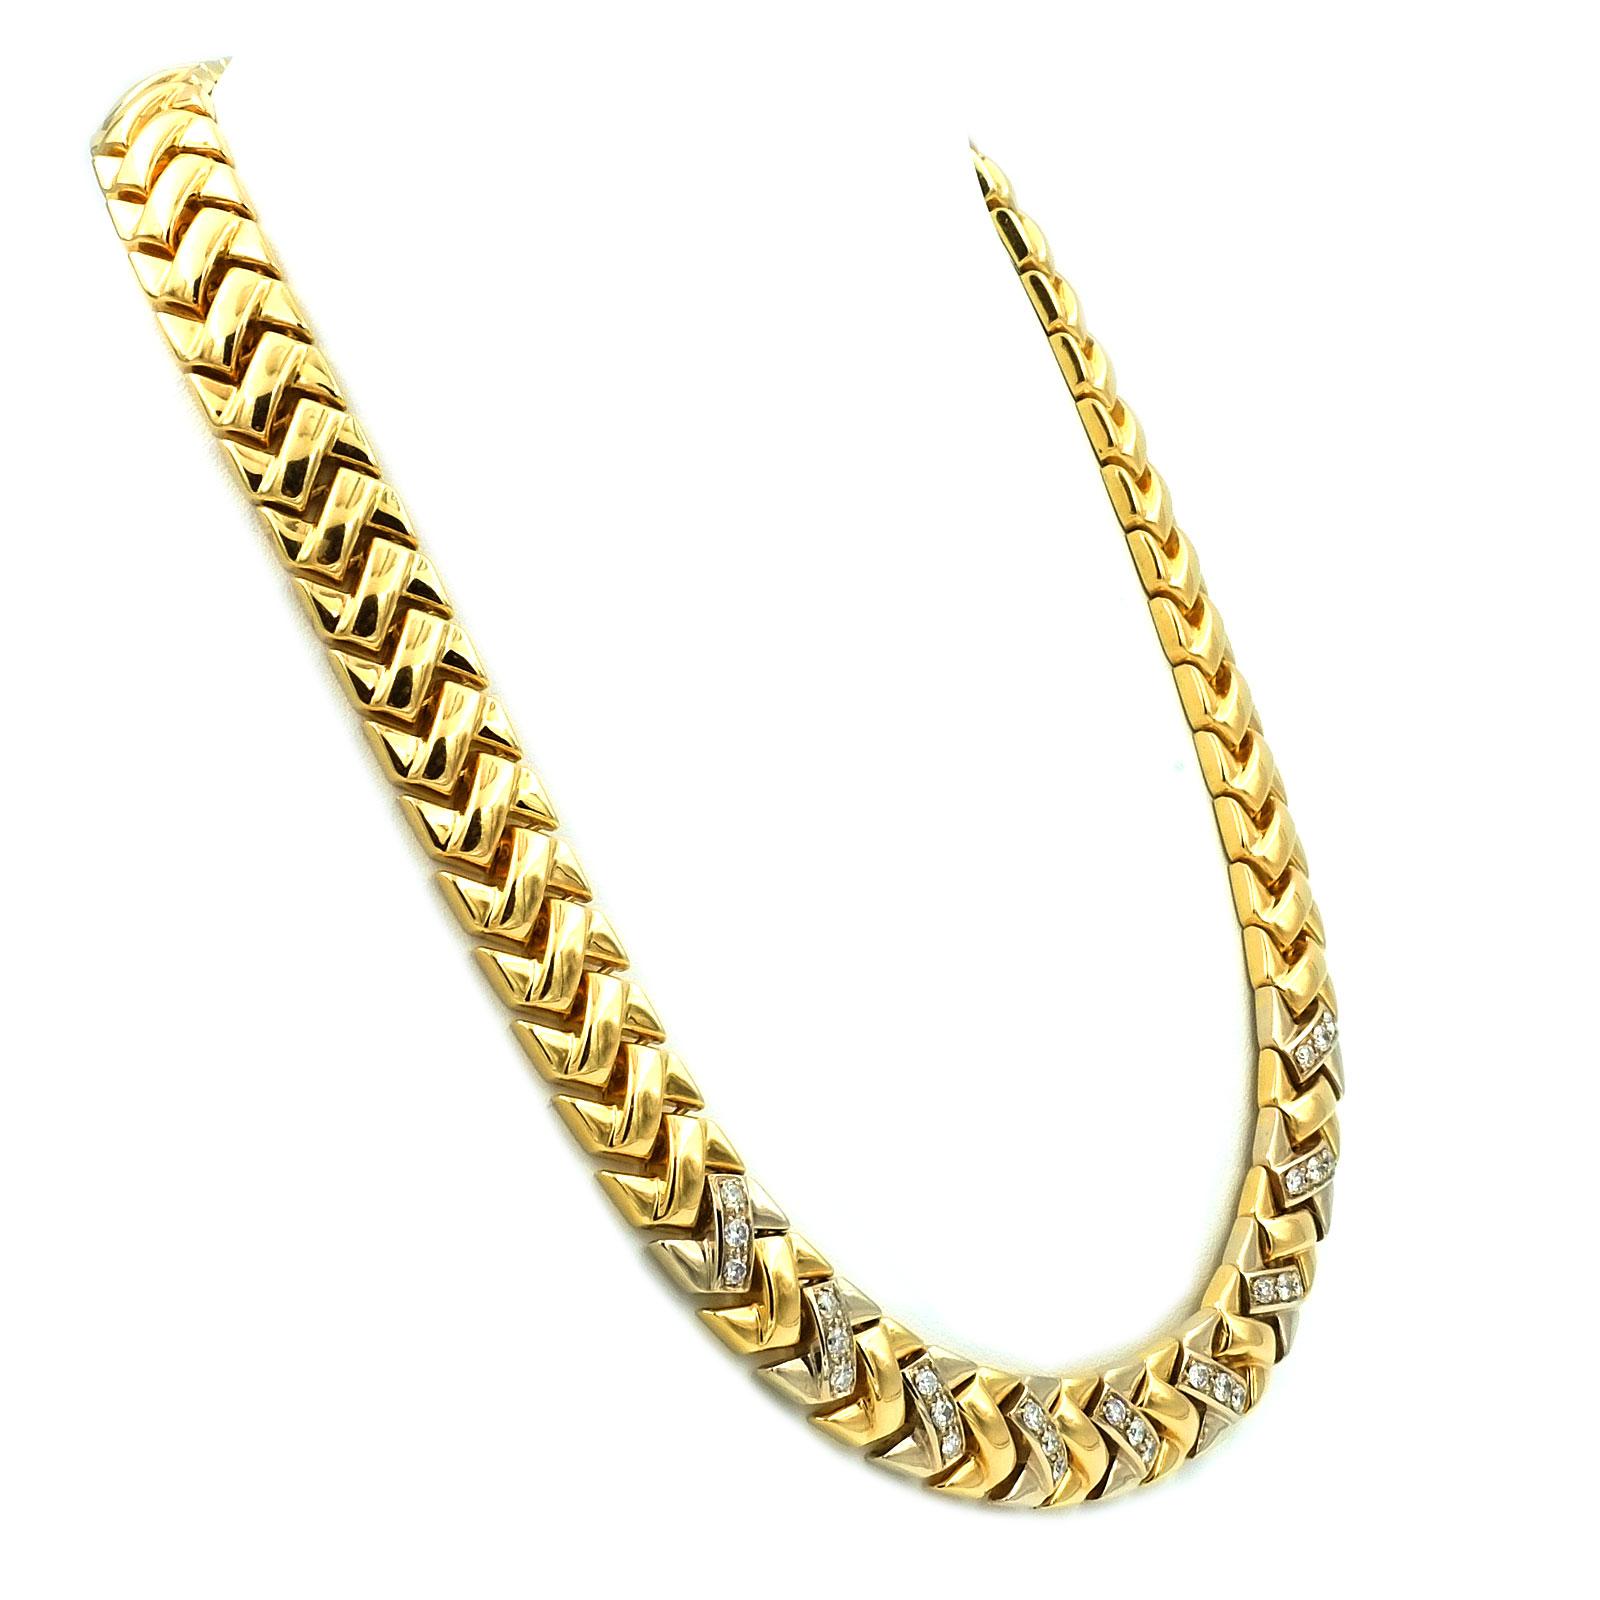 1 Carat Diamond 18K Gold Choker Necklace

Sporty, elegant diamond necklace made of high-carat gold in solid workmanship. The broad, flat-fitting collar, made of waved links, is set on the front with 27 brilliant diamonds of 1 ct in total. Like a